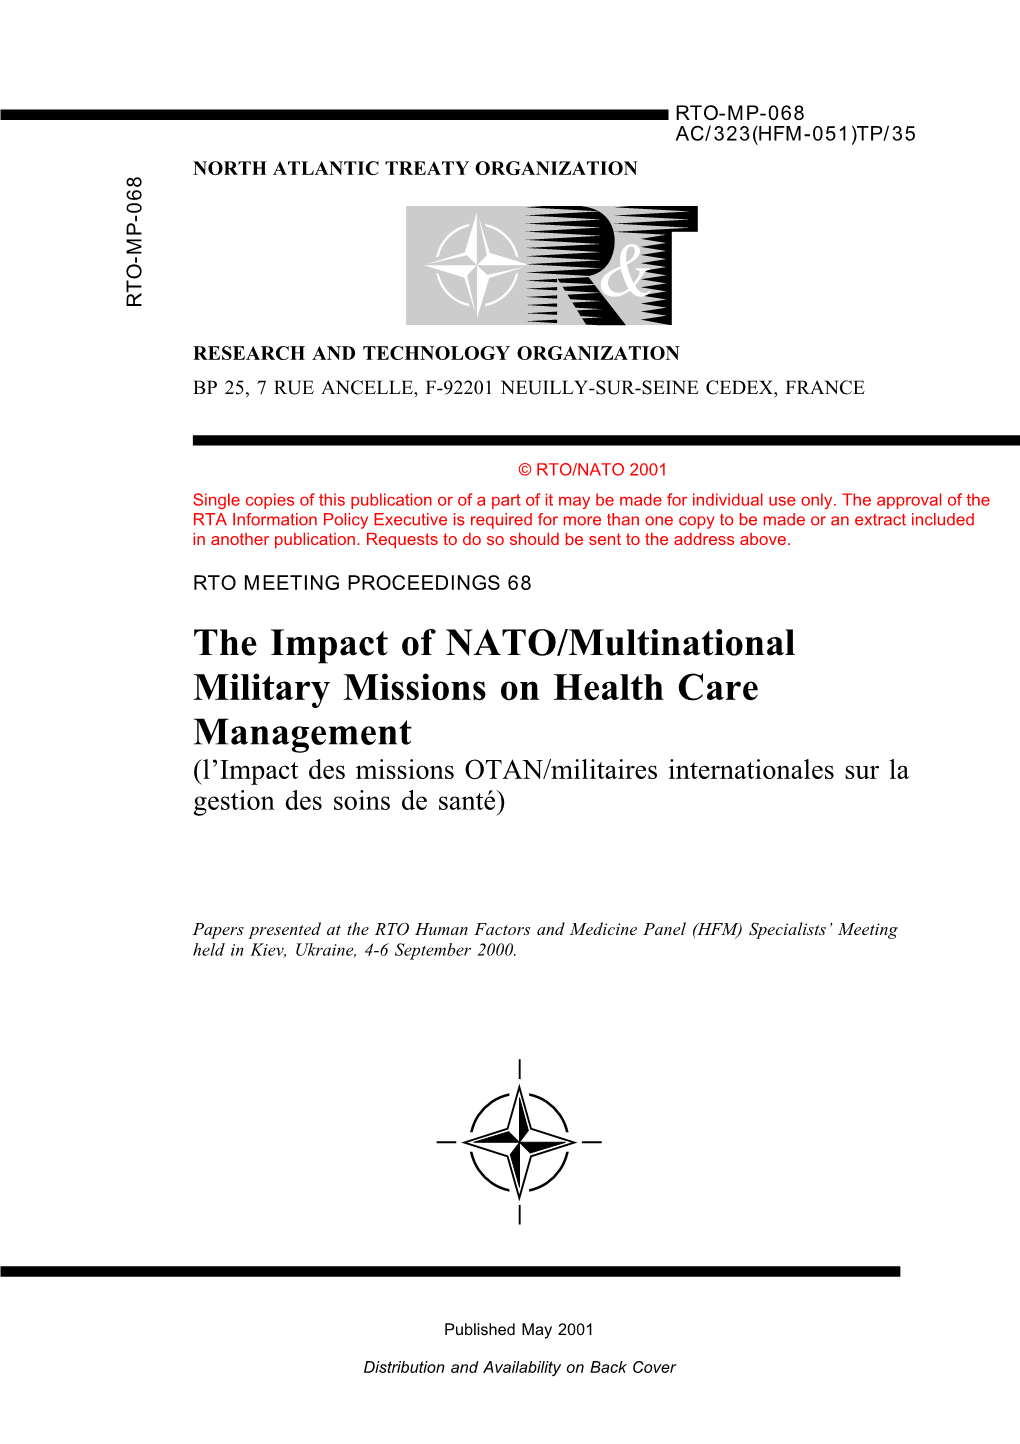 The Impact of NATO/Multinational Military Missions on Health Care